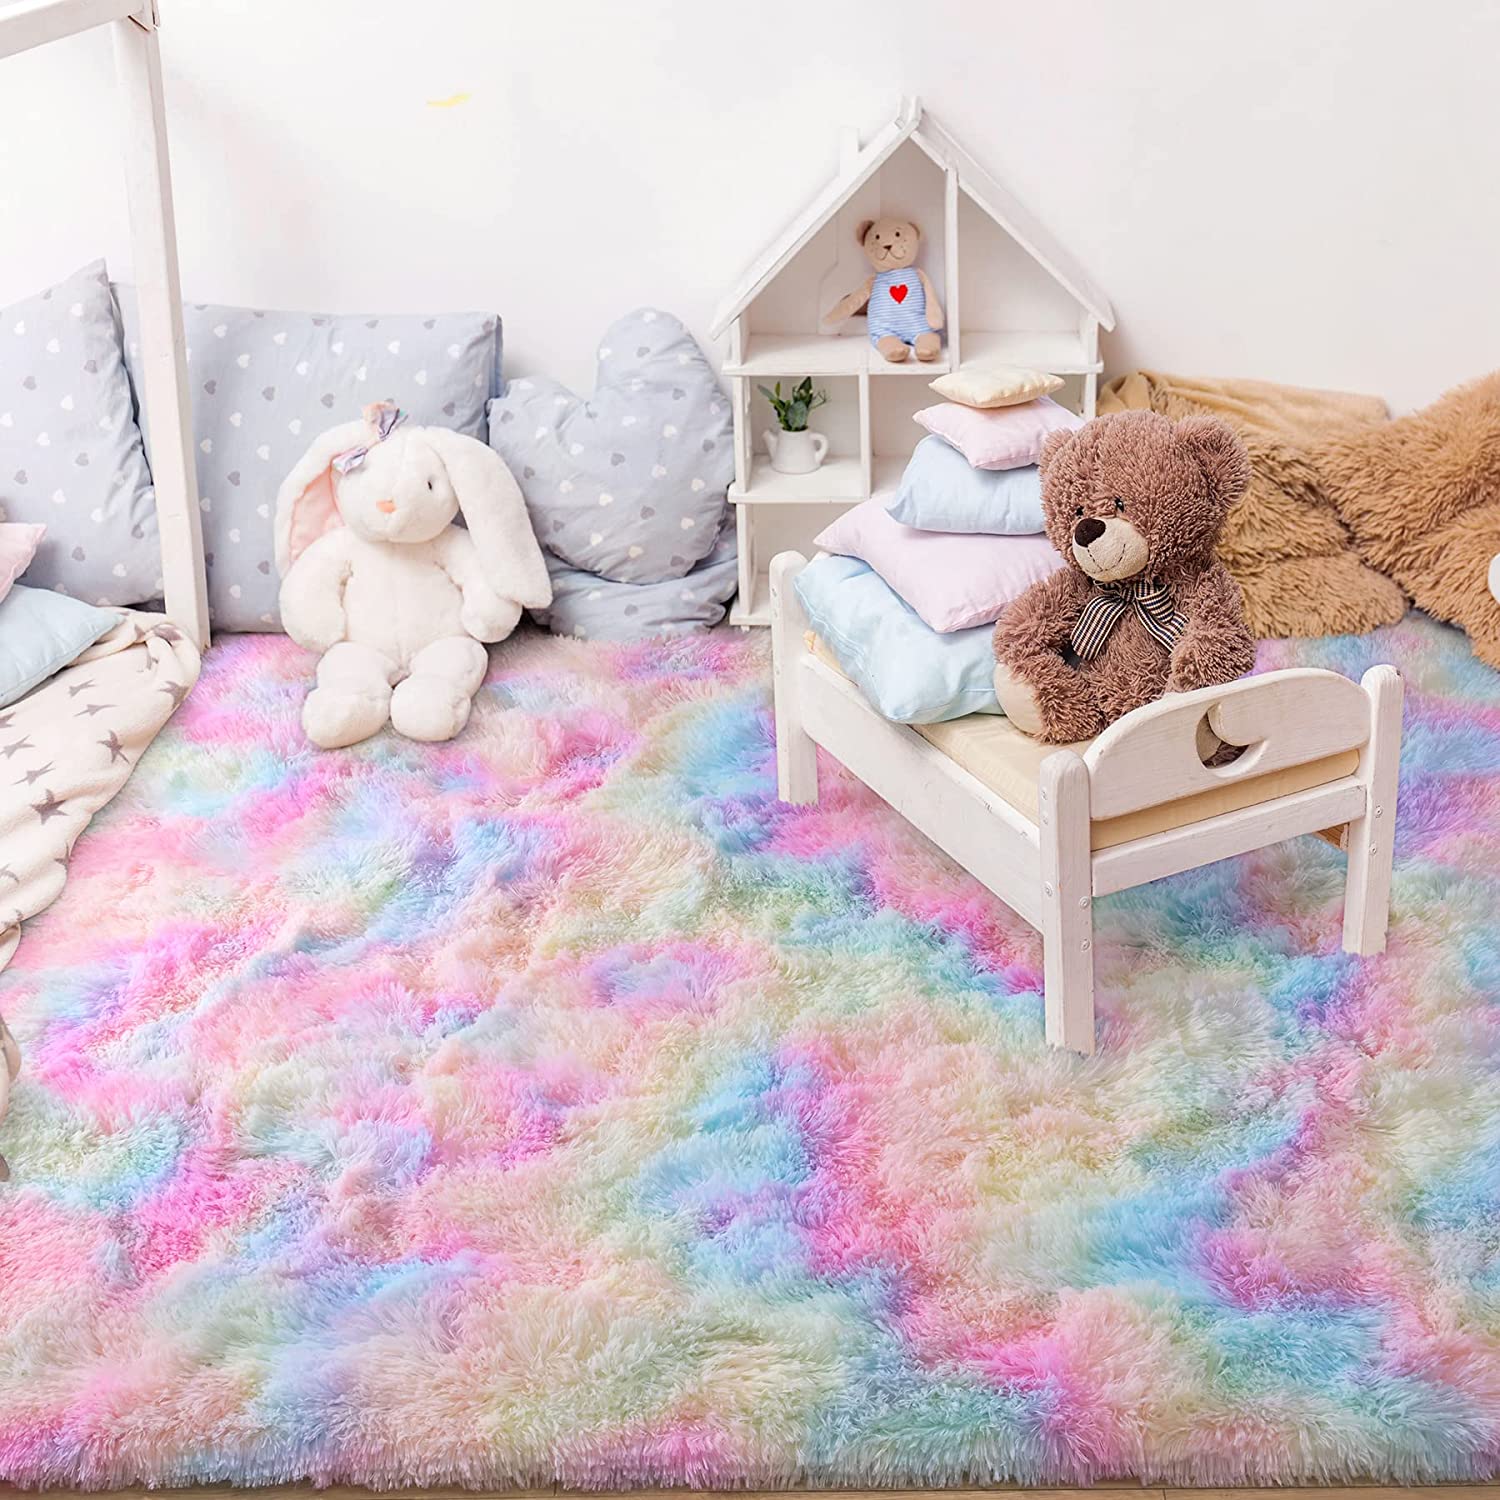 Noahas Super Soft Rainbow Rugs Area Rugs For Kids, Colorful Shaggy Carpet For Living Room Bedroom Nursery Room, 4'x6' - image 2 of 8